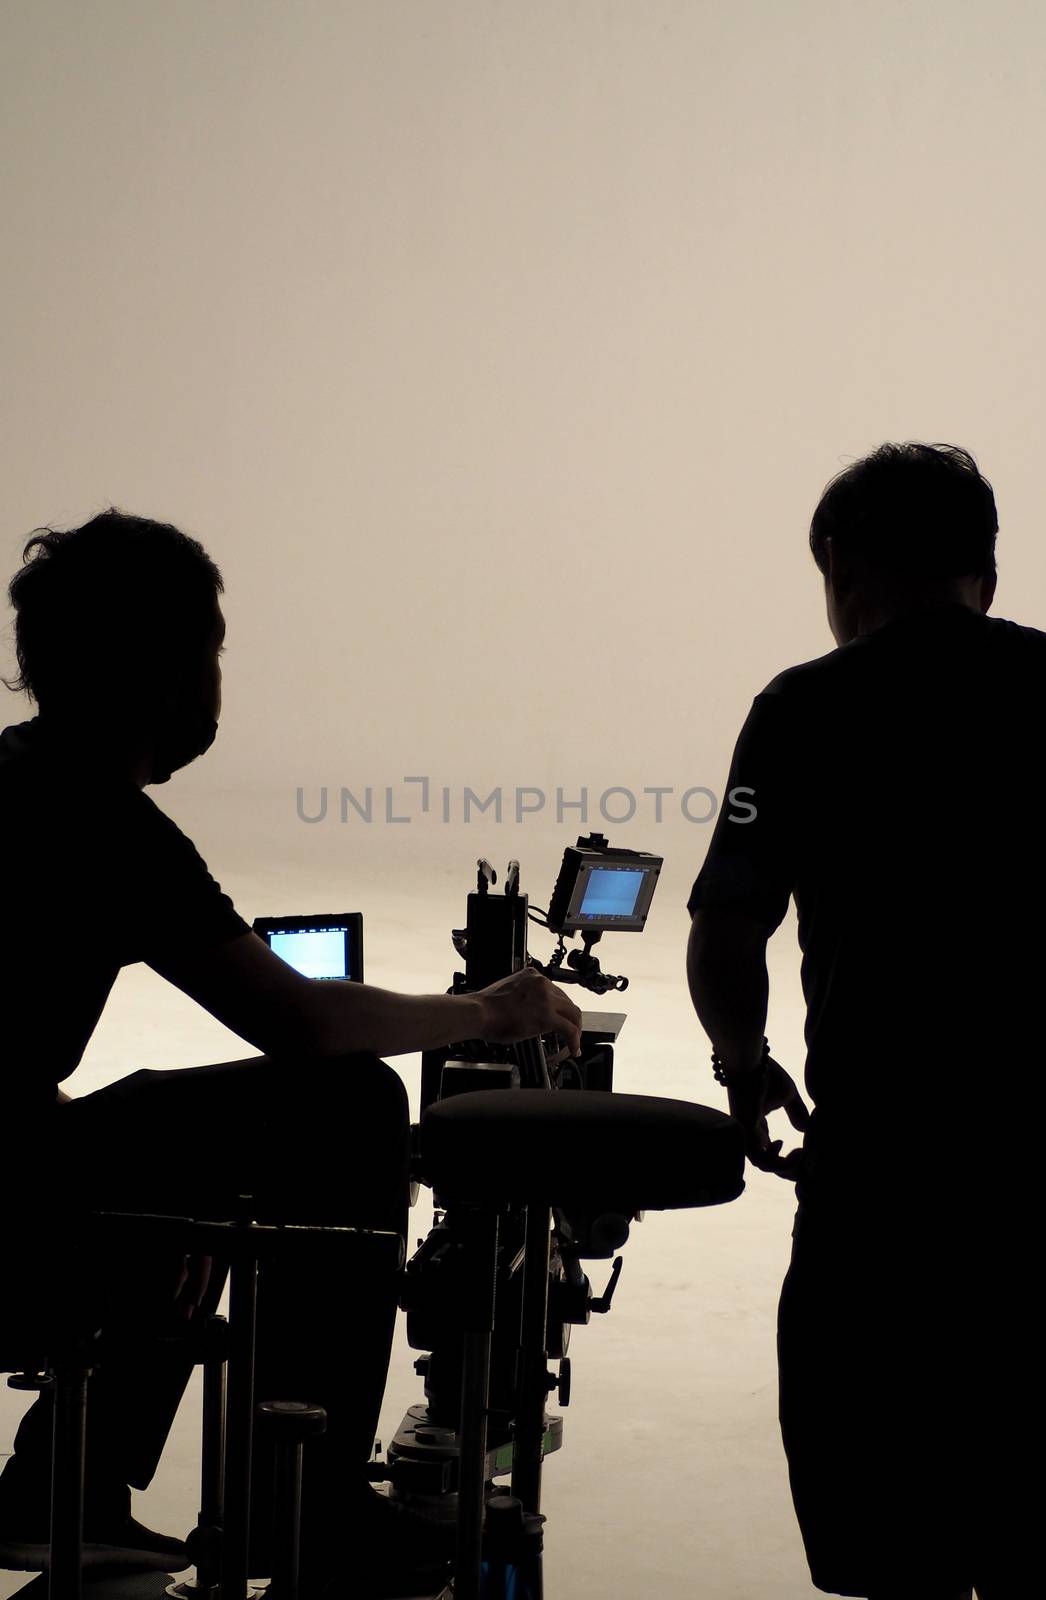 Behind the scenes of silhouette working people that making movie or tv channel content or film in big studio with camera set and production crew team.